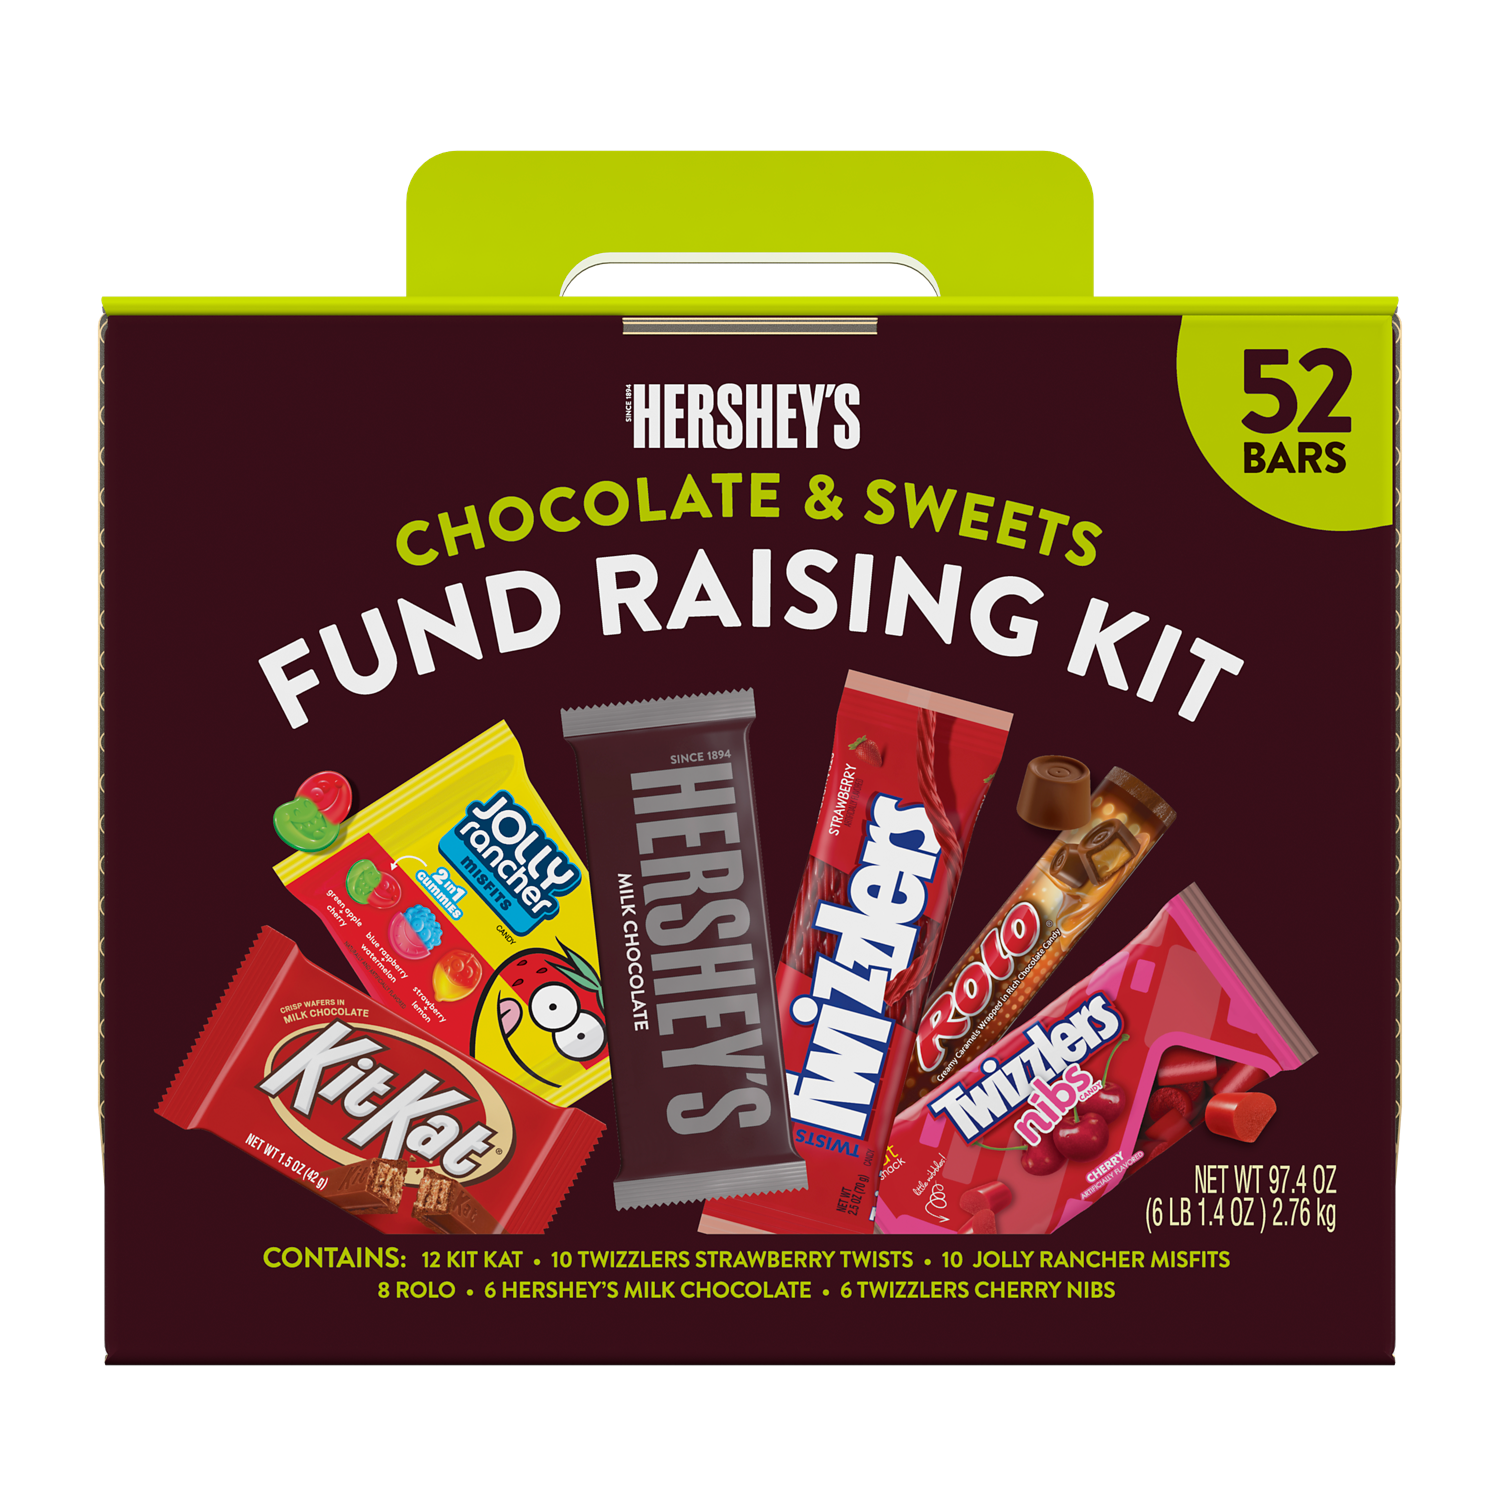 Hershey Chocolate & Sweets Fund Raising Kit, 97.4 oz box, 52 bars - Front of Package